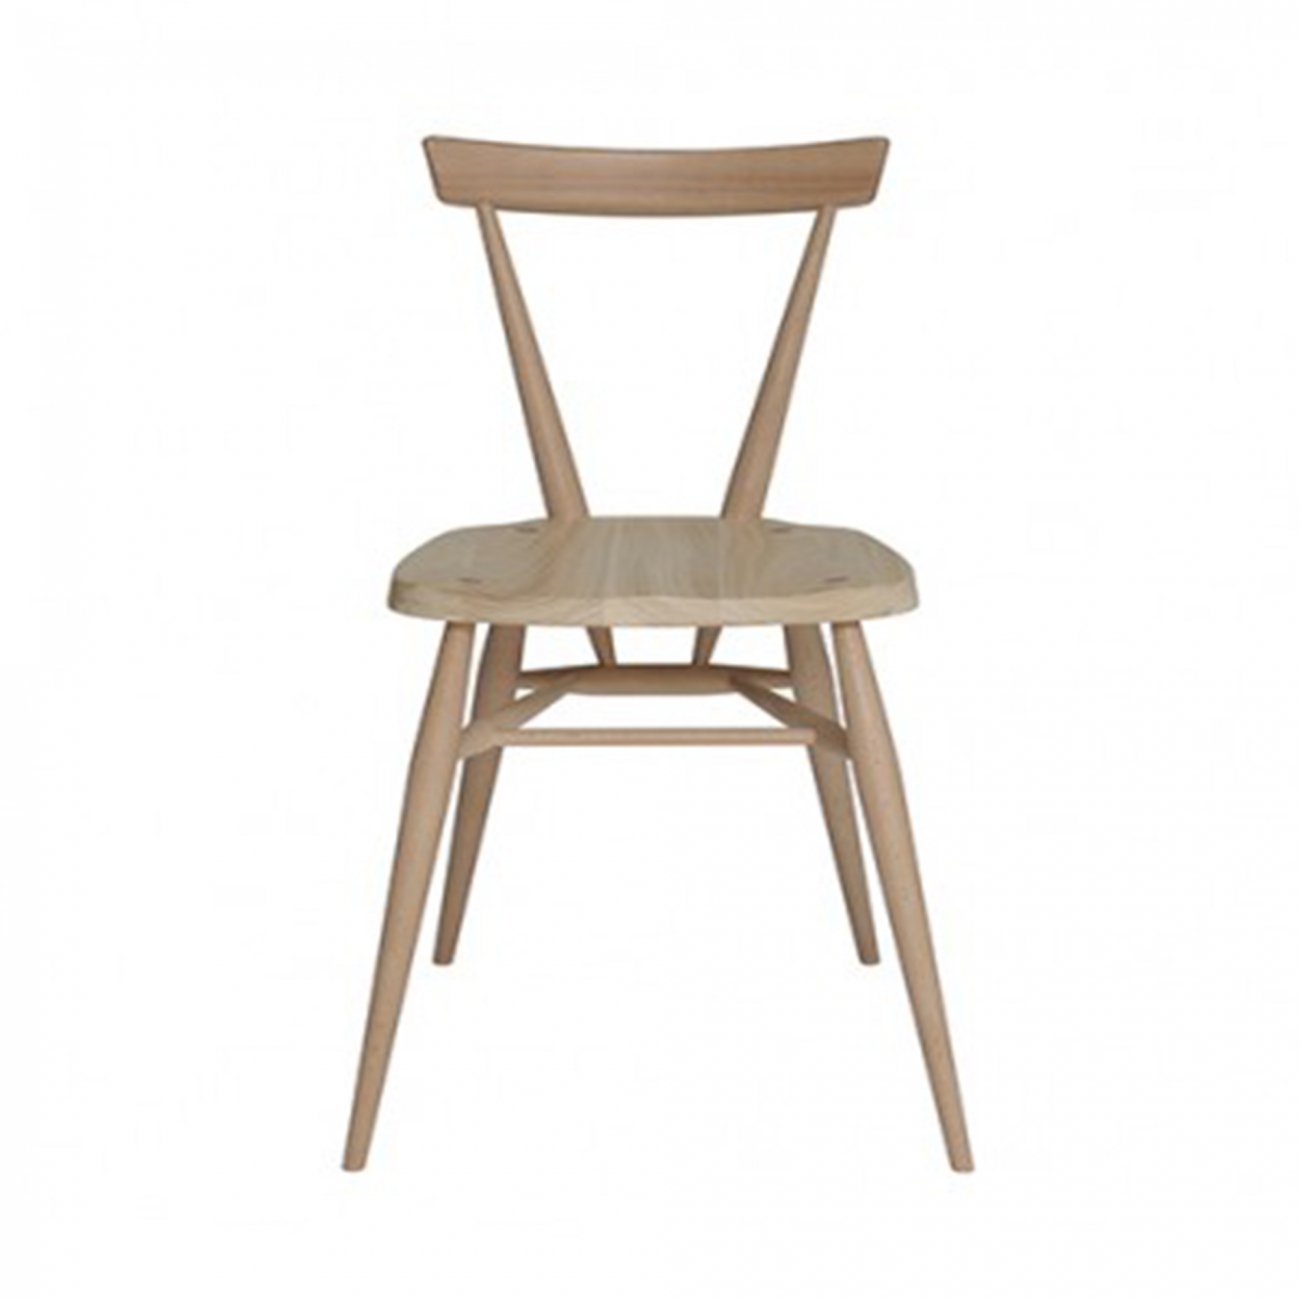 Ercol Chairmakers Stacking Sedia